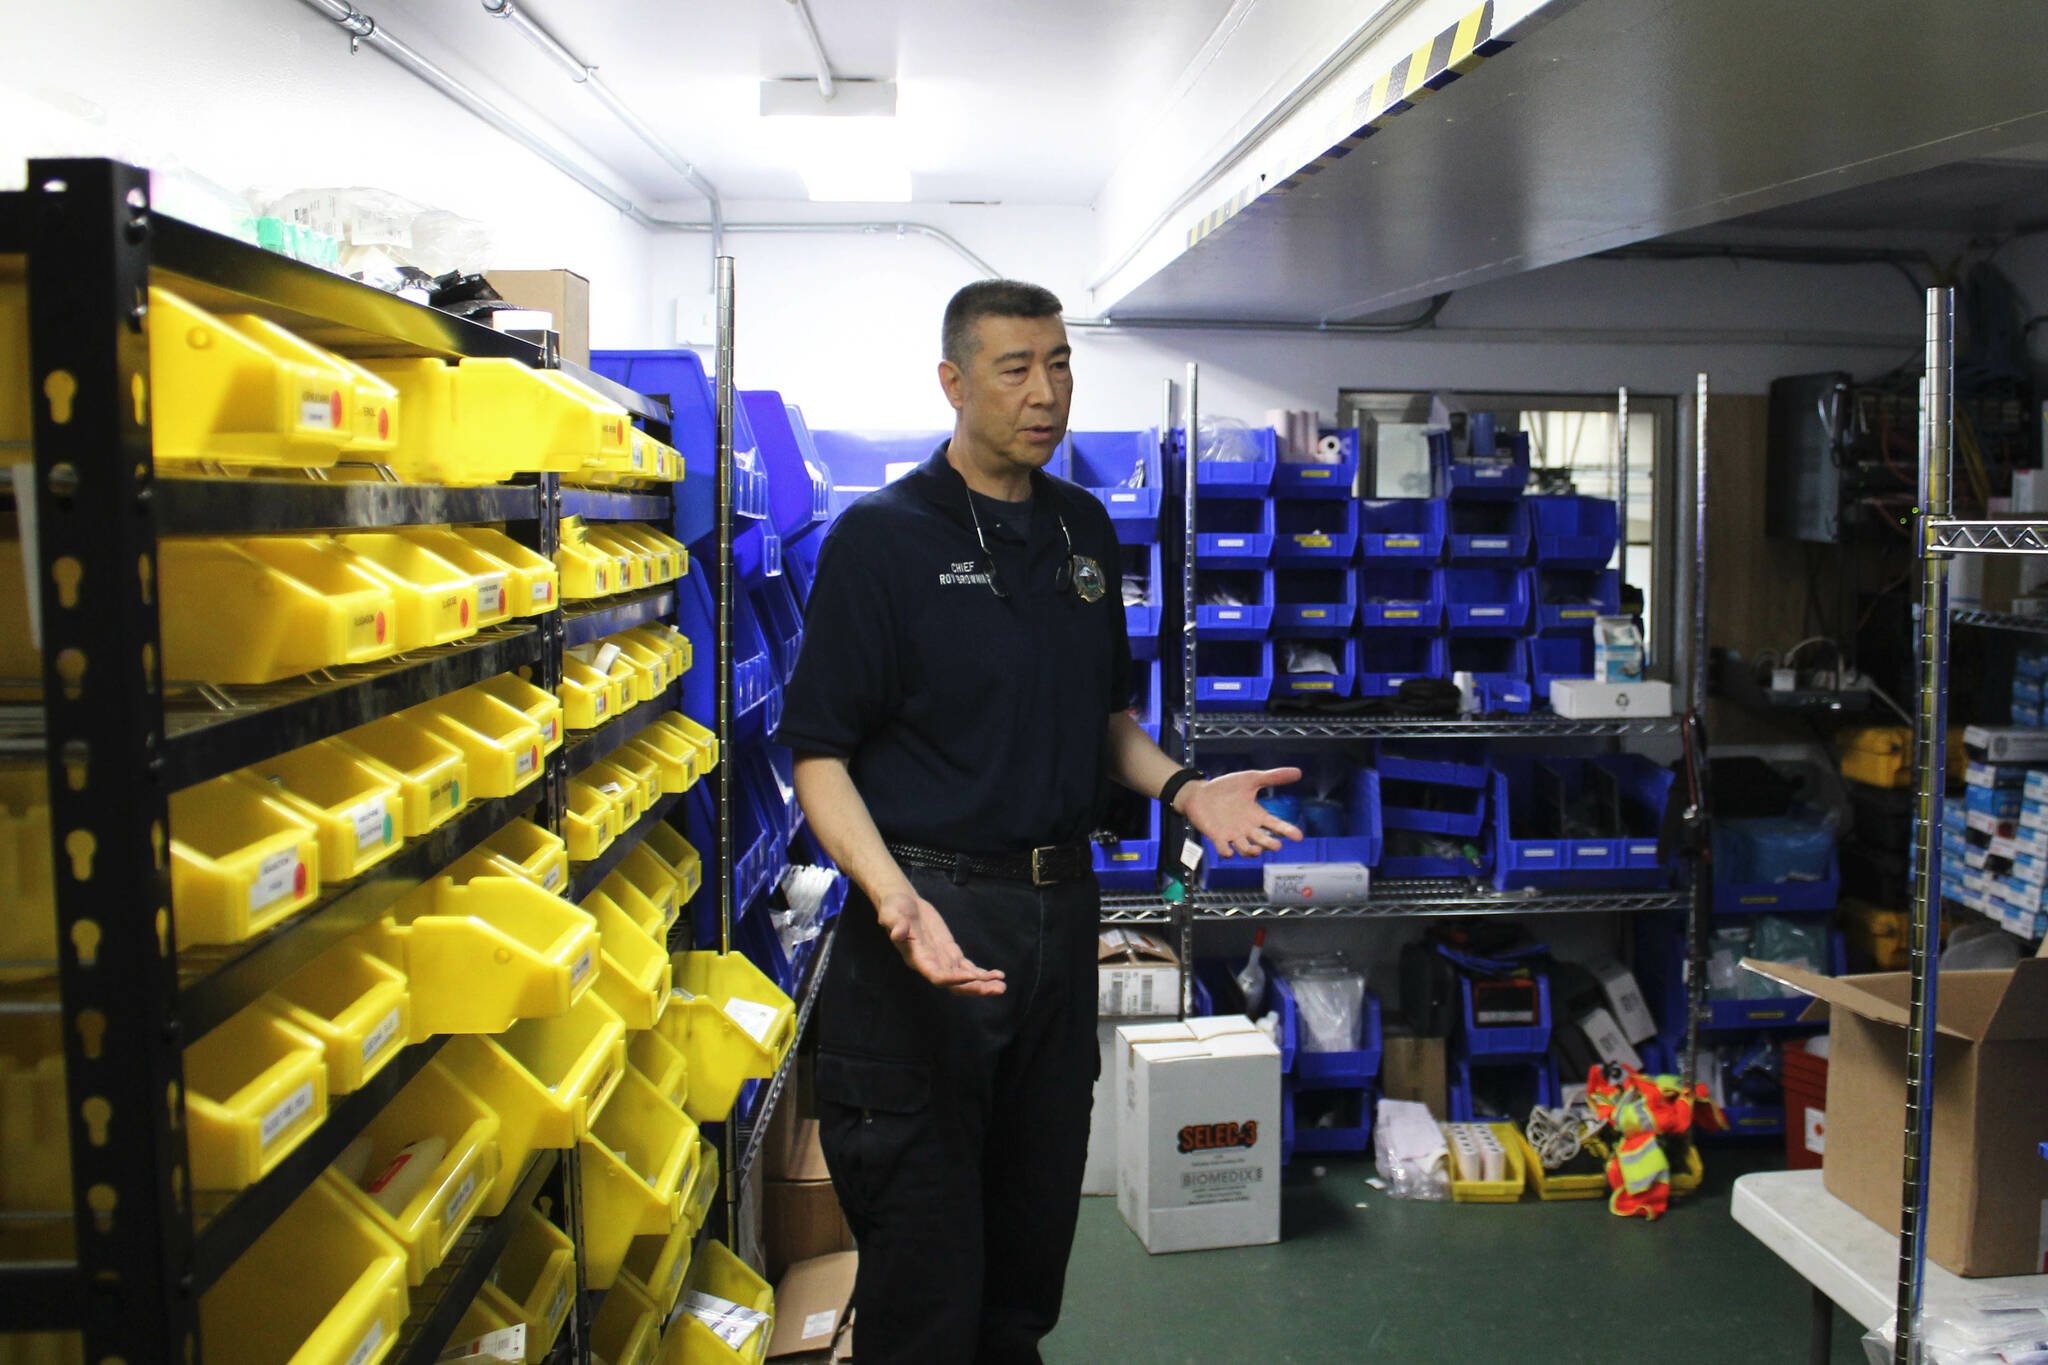 Central Emergency Services Fire Chief Roy Browning stands in the agency’s ambulance supply room on Tuesday, July 26, 2022, in Soldotna, Alaska. (Ashlyn O’Hara/Peninsula Clarion)